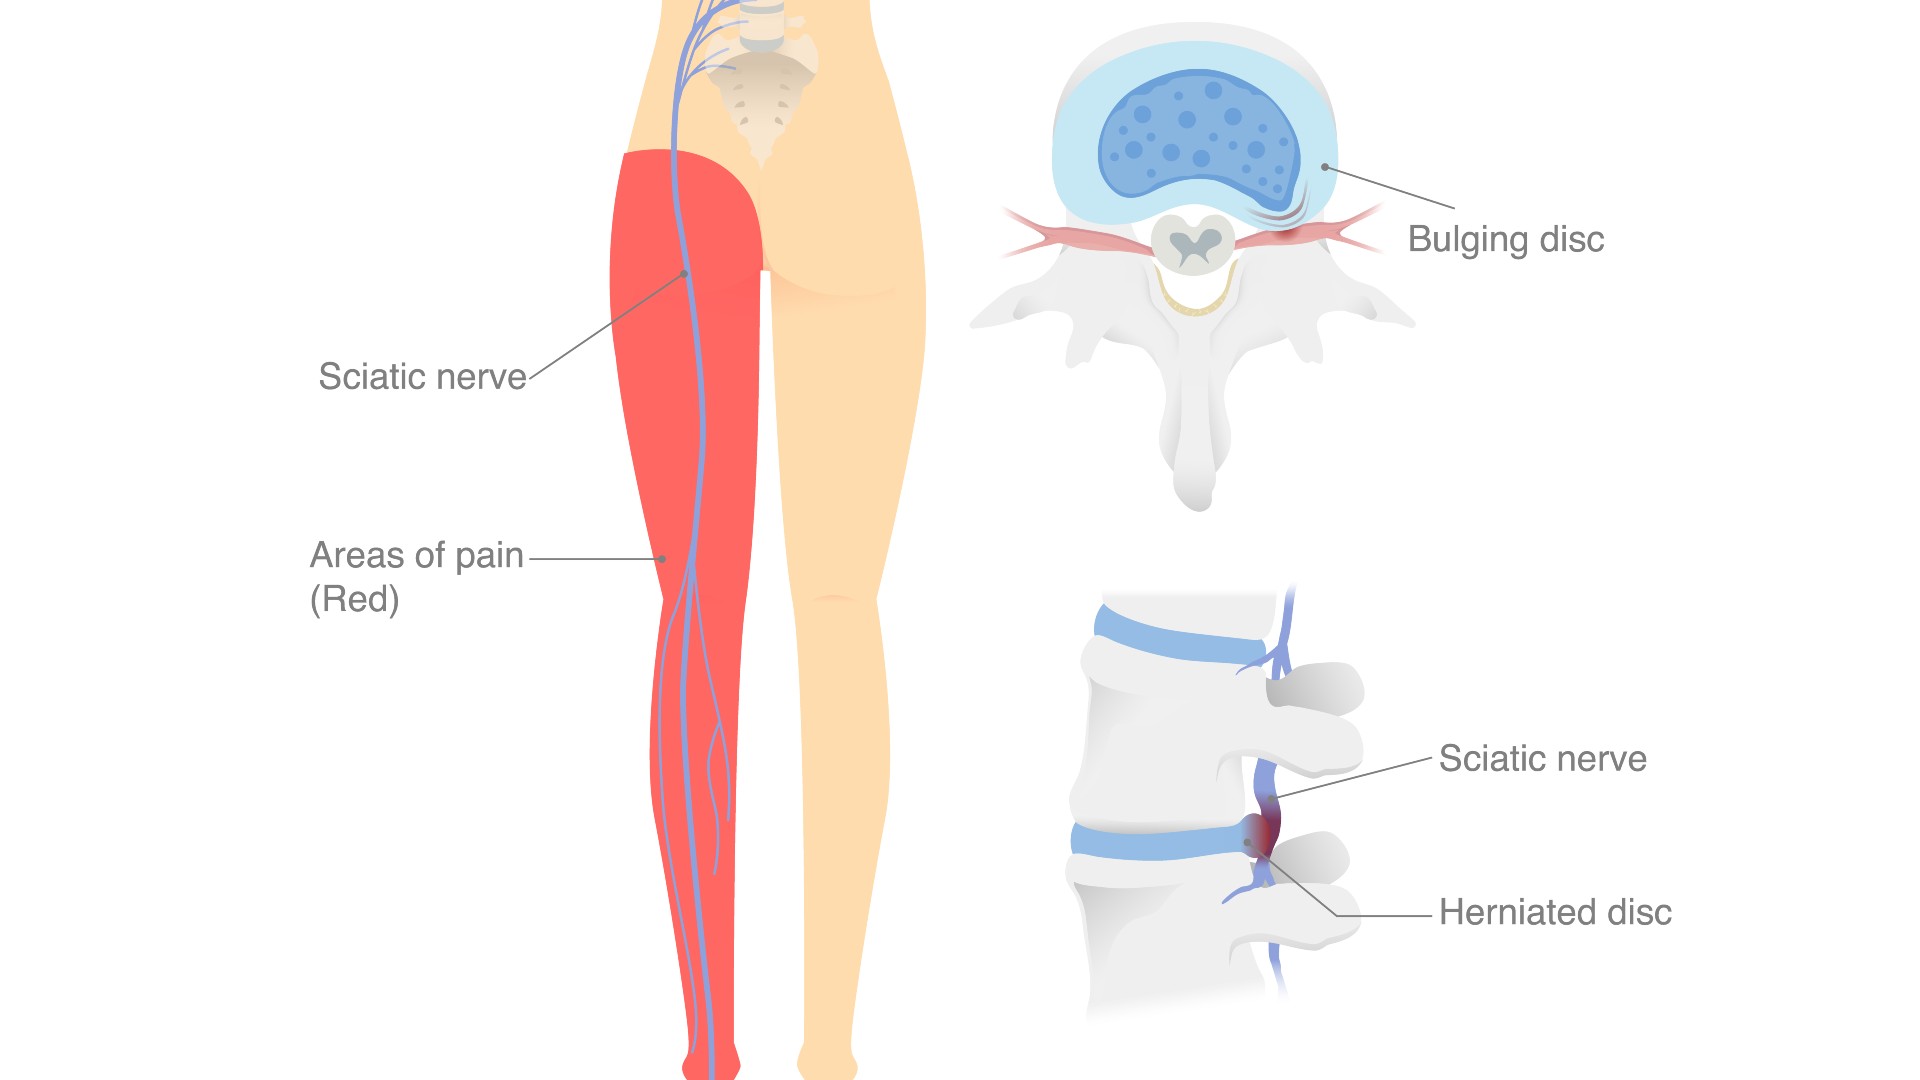 Image of sciatic nerve on the human body